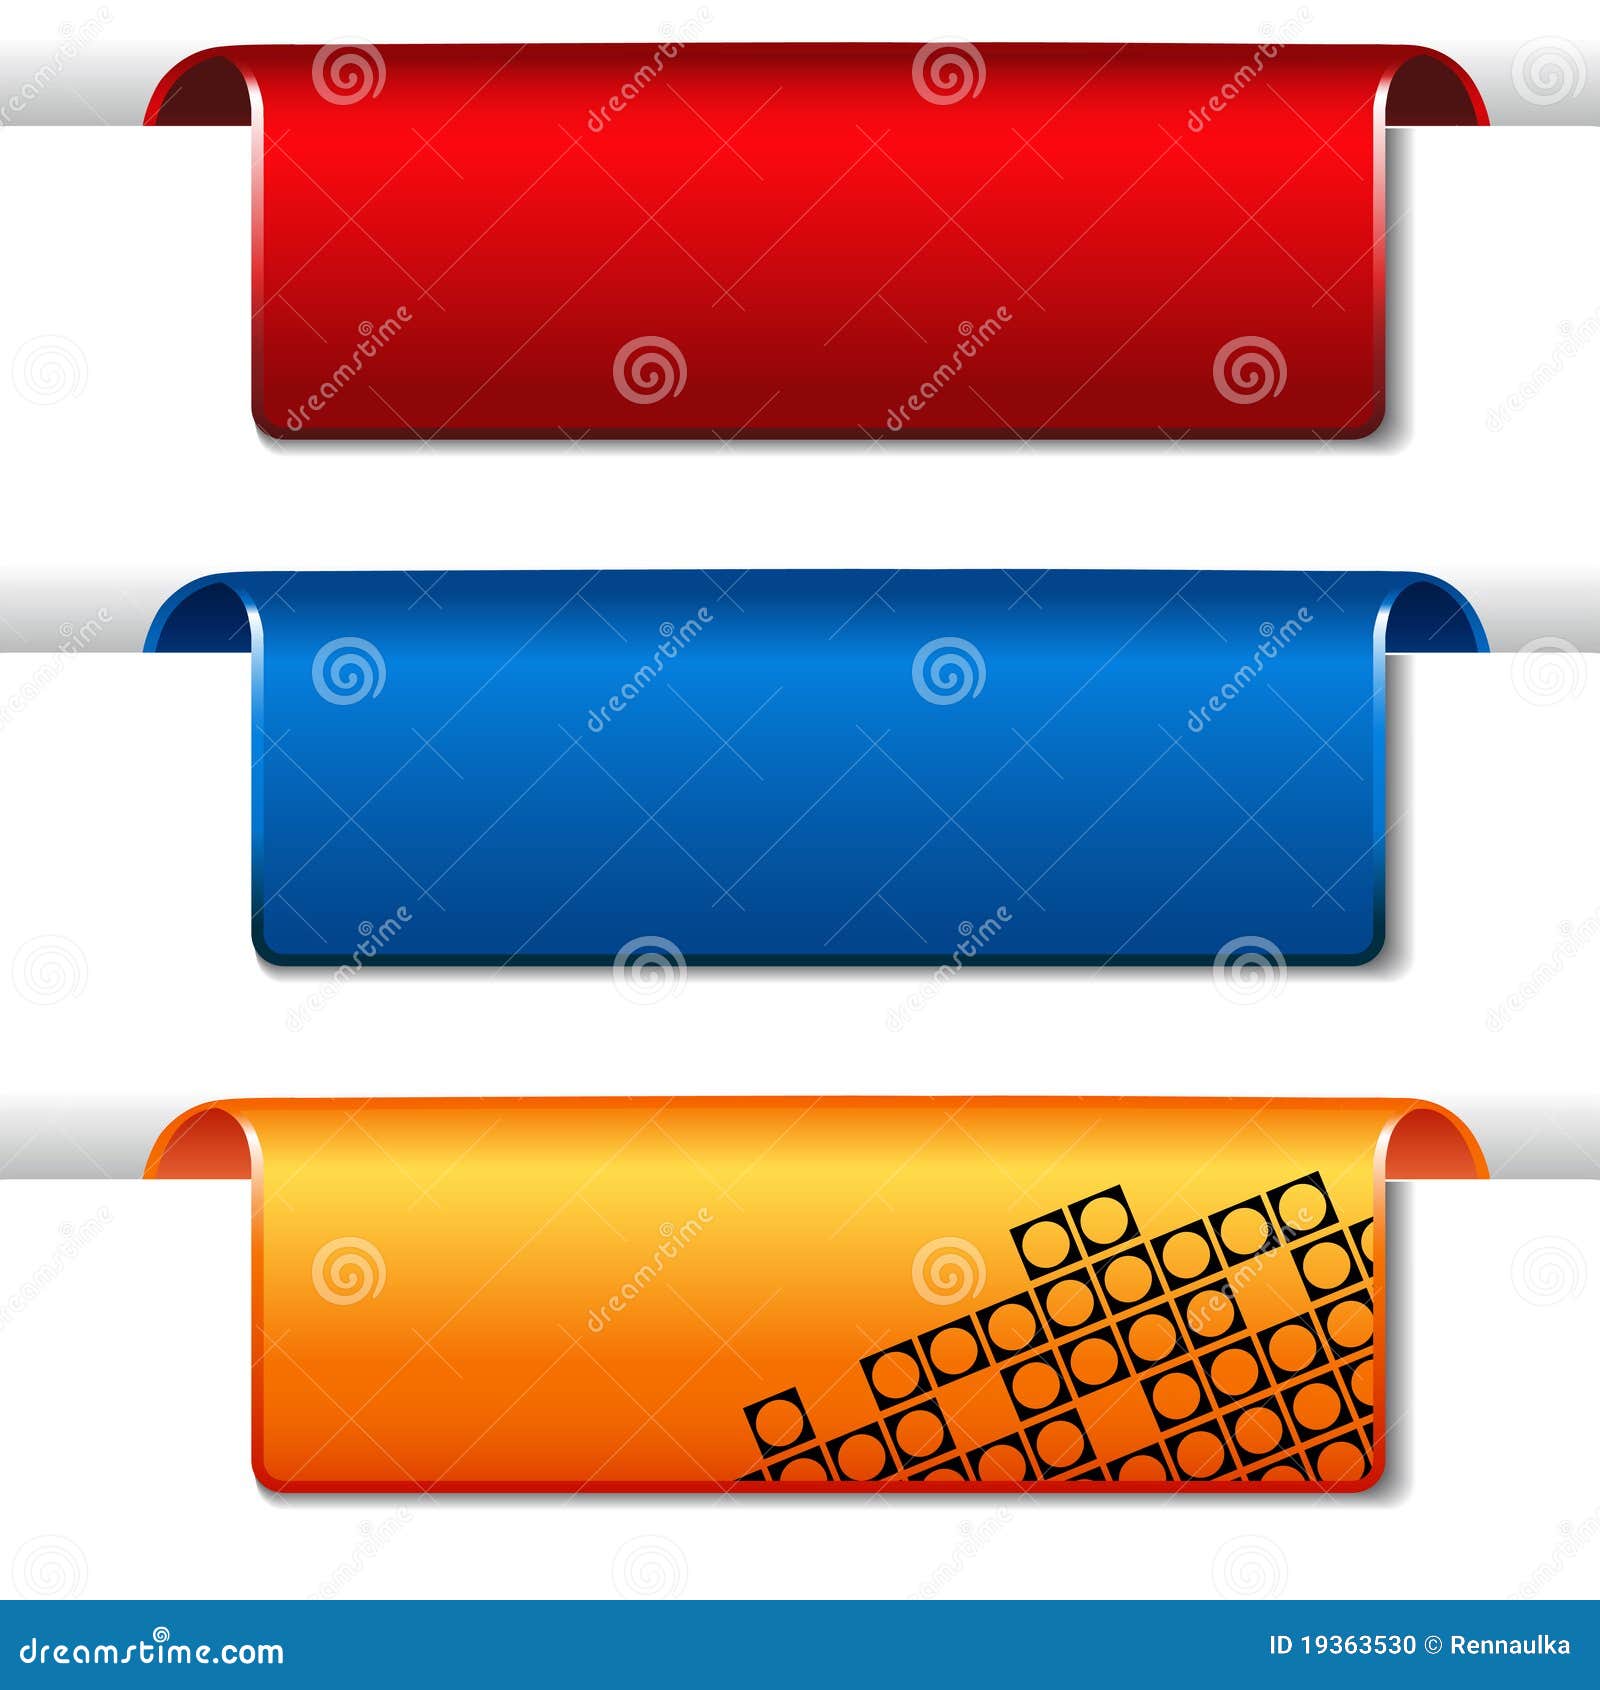 Vector set of banners stock vector. Illustration of mosaic - 19363530